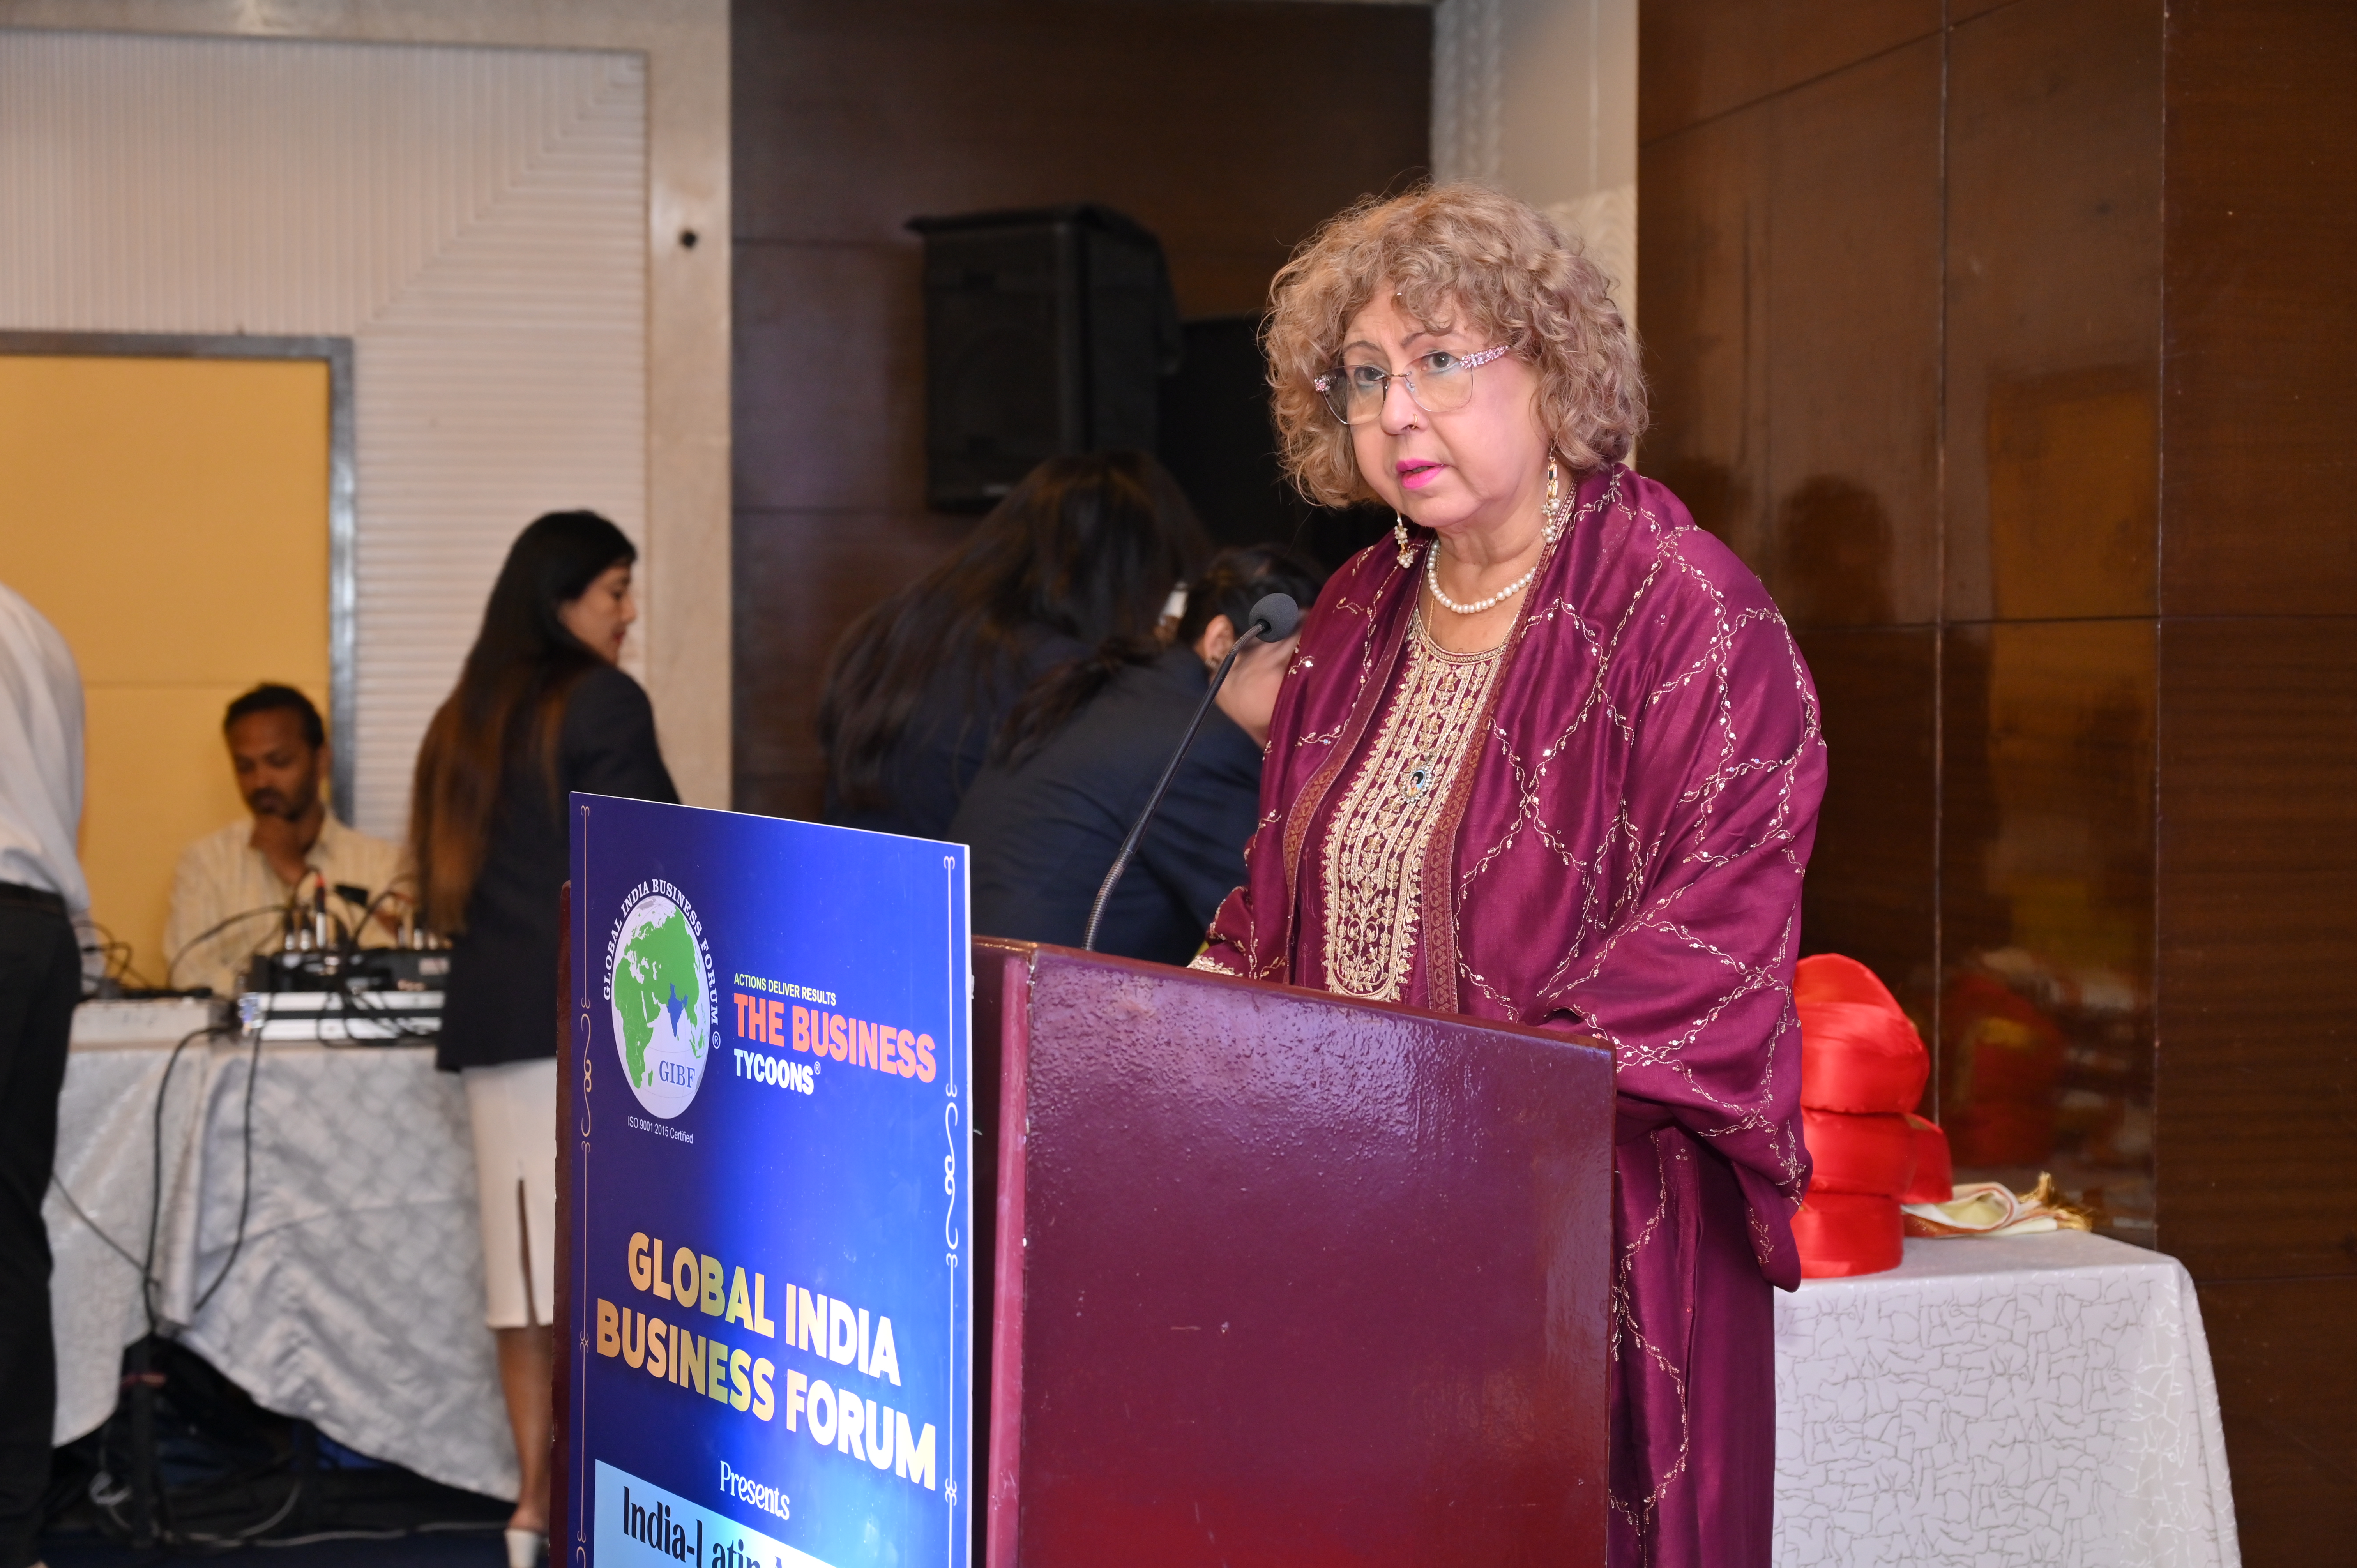 gibf-past-event-india-latin-america-and-caribbean-country-business-conclave-her-excellency-ms-capaya-rodriguez-gonzalez-ambassador-of-the-bolivarian-republic-of-venezuela